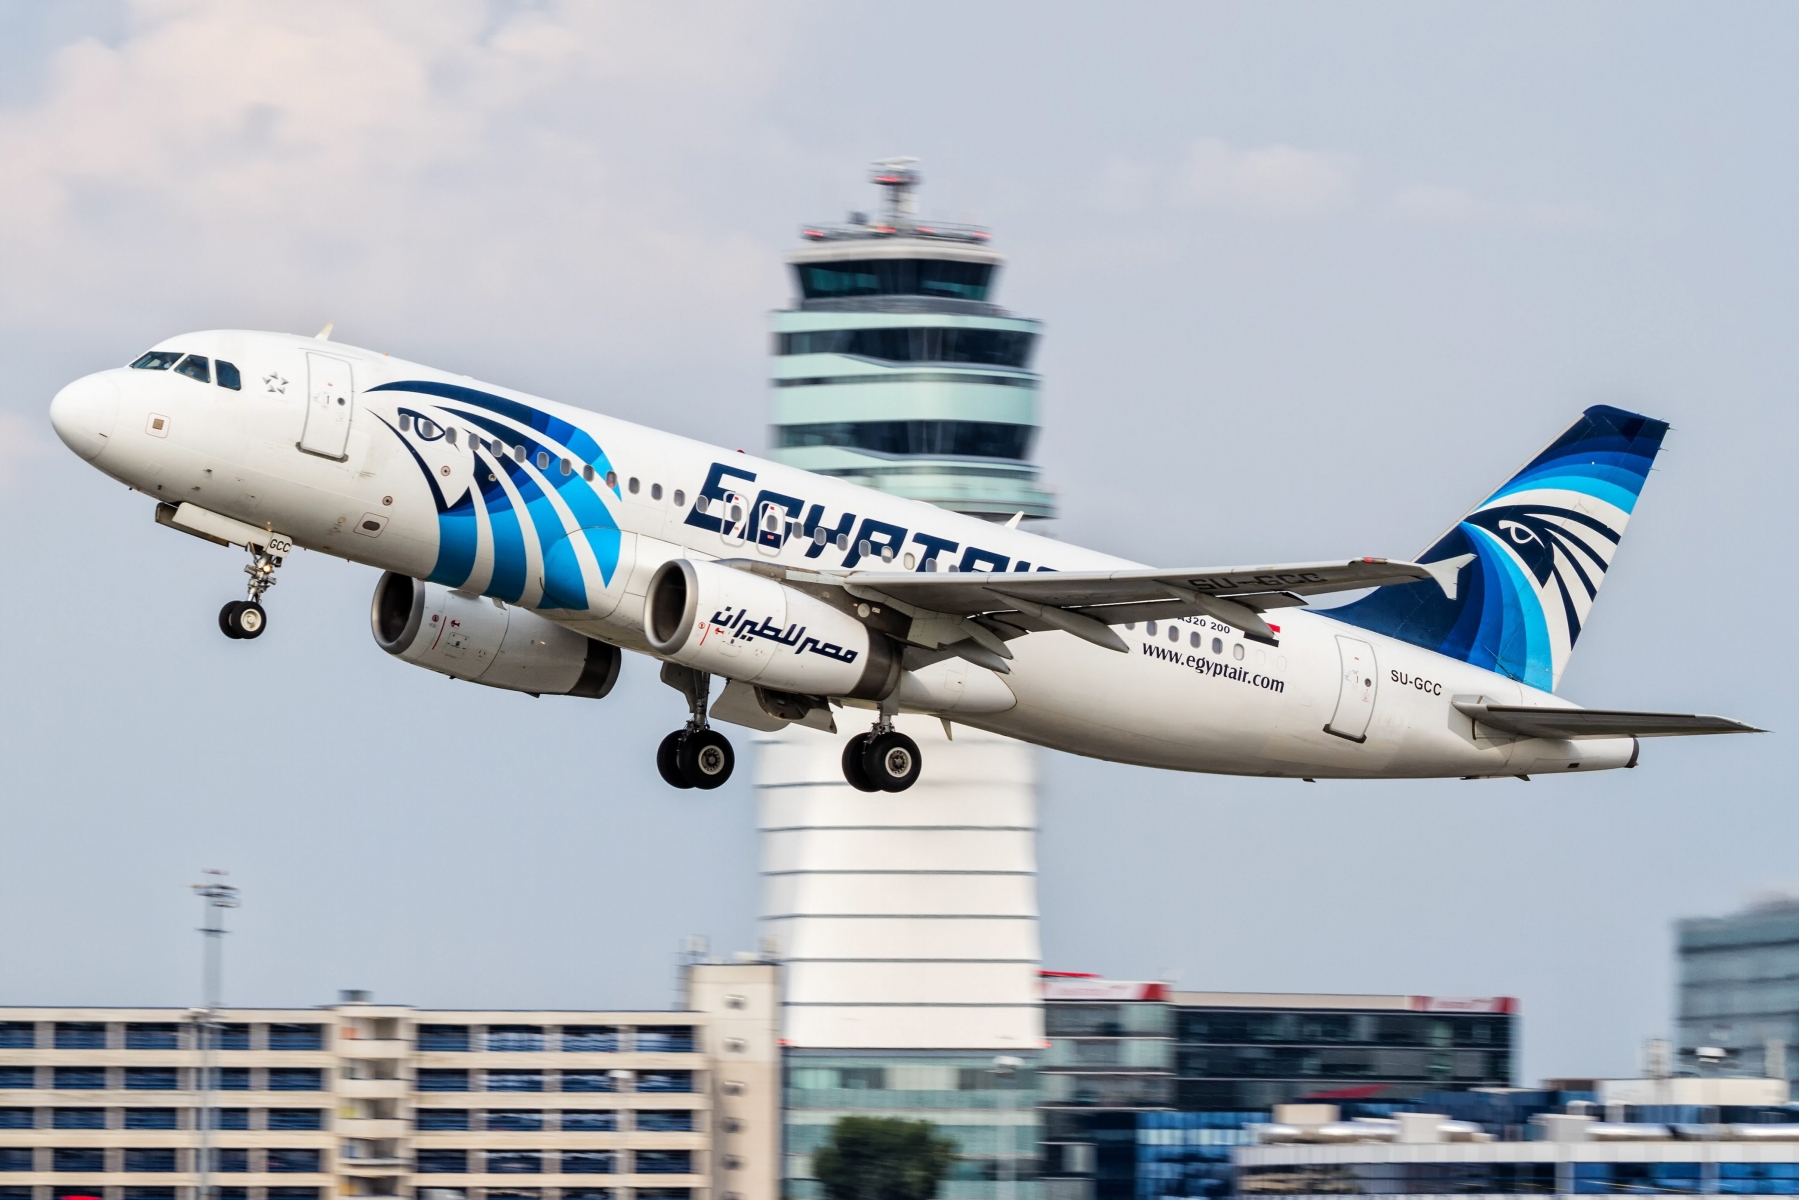 This August 21, 2015 photo shows an EgyptAir Airbus A320 with the registration SU-GCC taking off from Vienna International Airport, Austria. Egyptian aviation officials said on Thursday May 19, 2016 that an EgyptAir plane with the registration SU-GCC, traveling from Paris to Cairo with 66 passengers and crew on board has crashed off the Greek island of Karpathos. Meanwhile, Egypt's chief prosecutor Nabil Sadek says he has ordered an "urgent investigation" into crash. Sadek instructed the National Security Prosecutor to open an "extensive investigation" in the incident. (AP Photo/Thomas Ranner) 9964558f38db438eb25b3fe2948af885